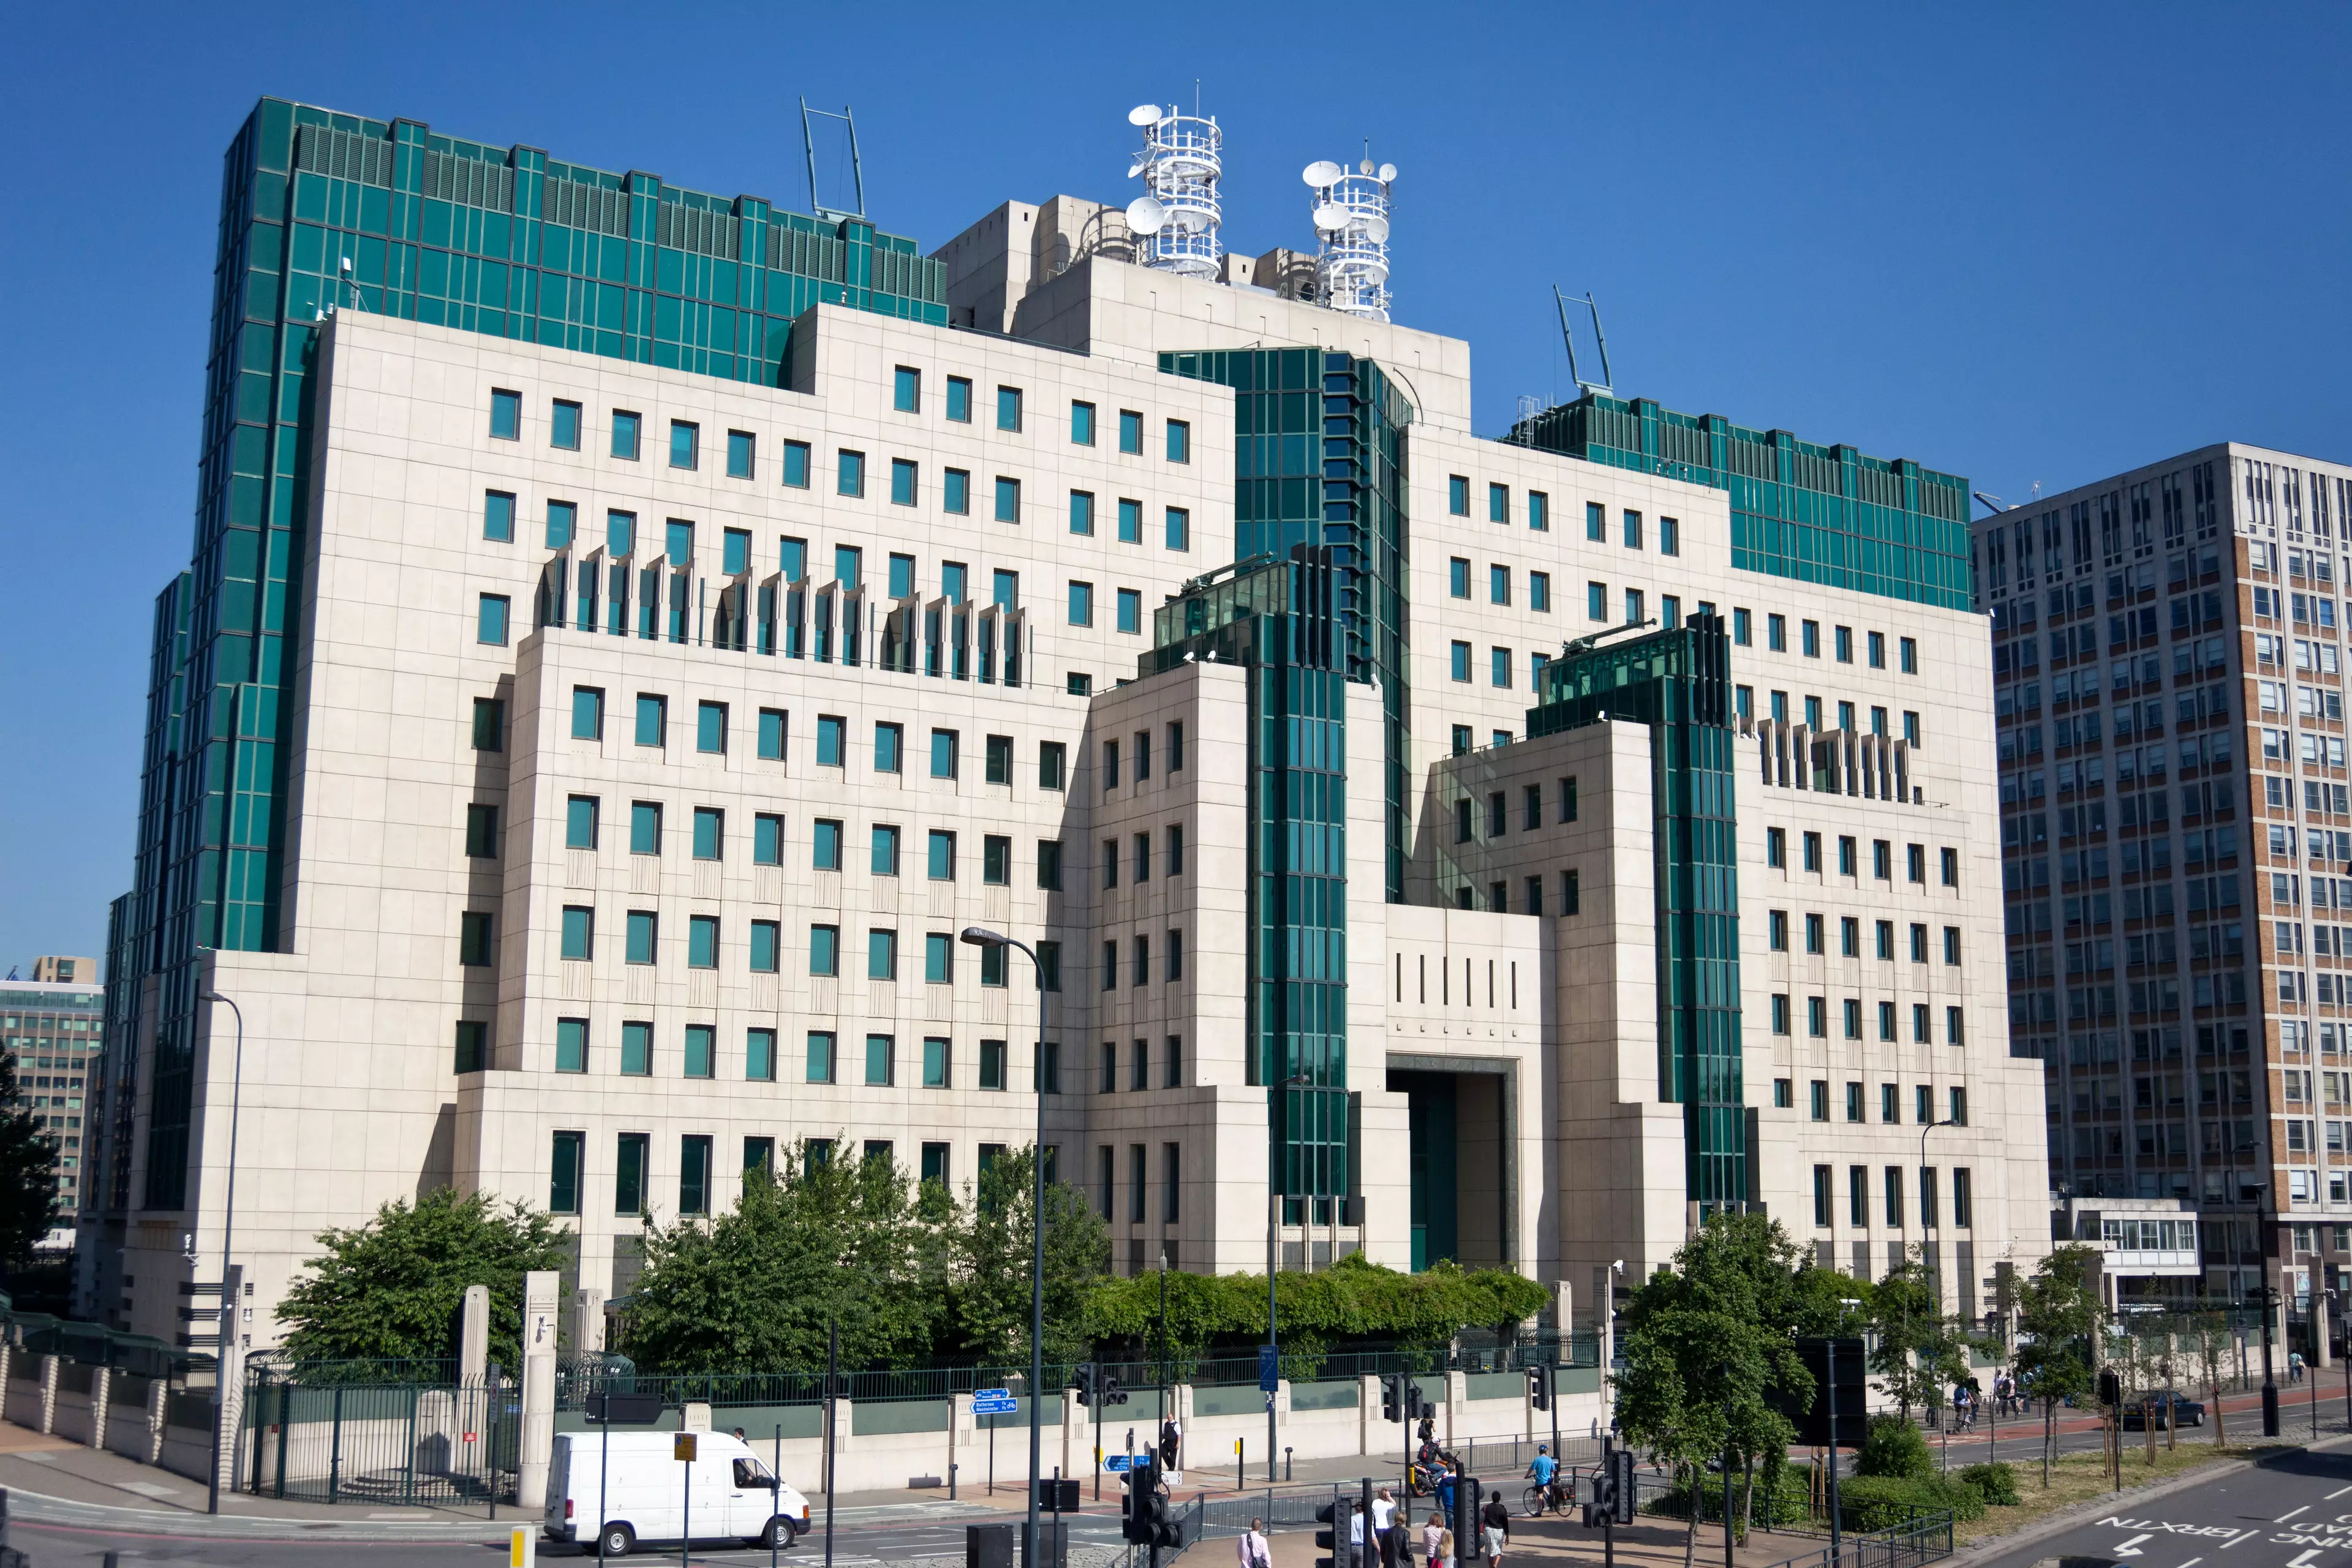 MI6 is also known as the Secret Intelligence Service.